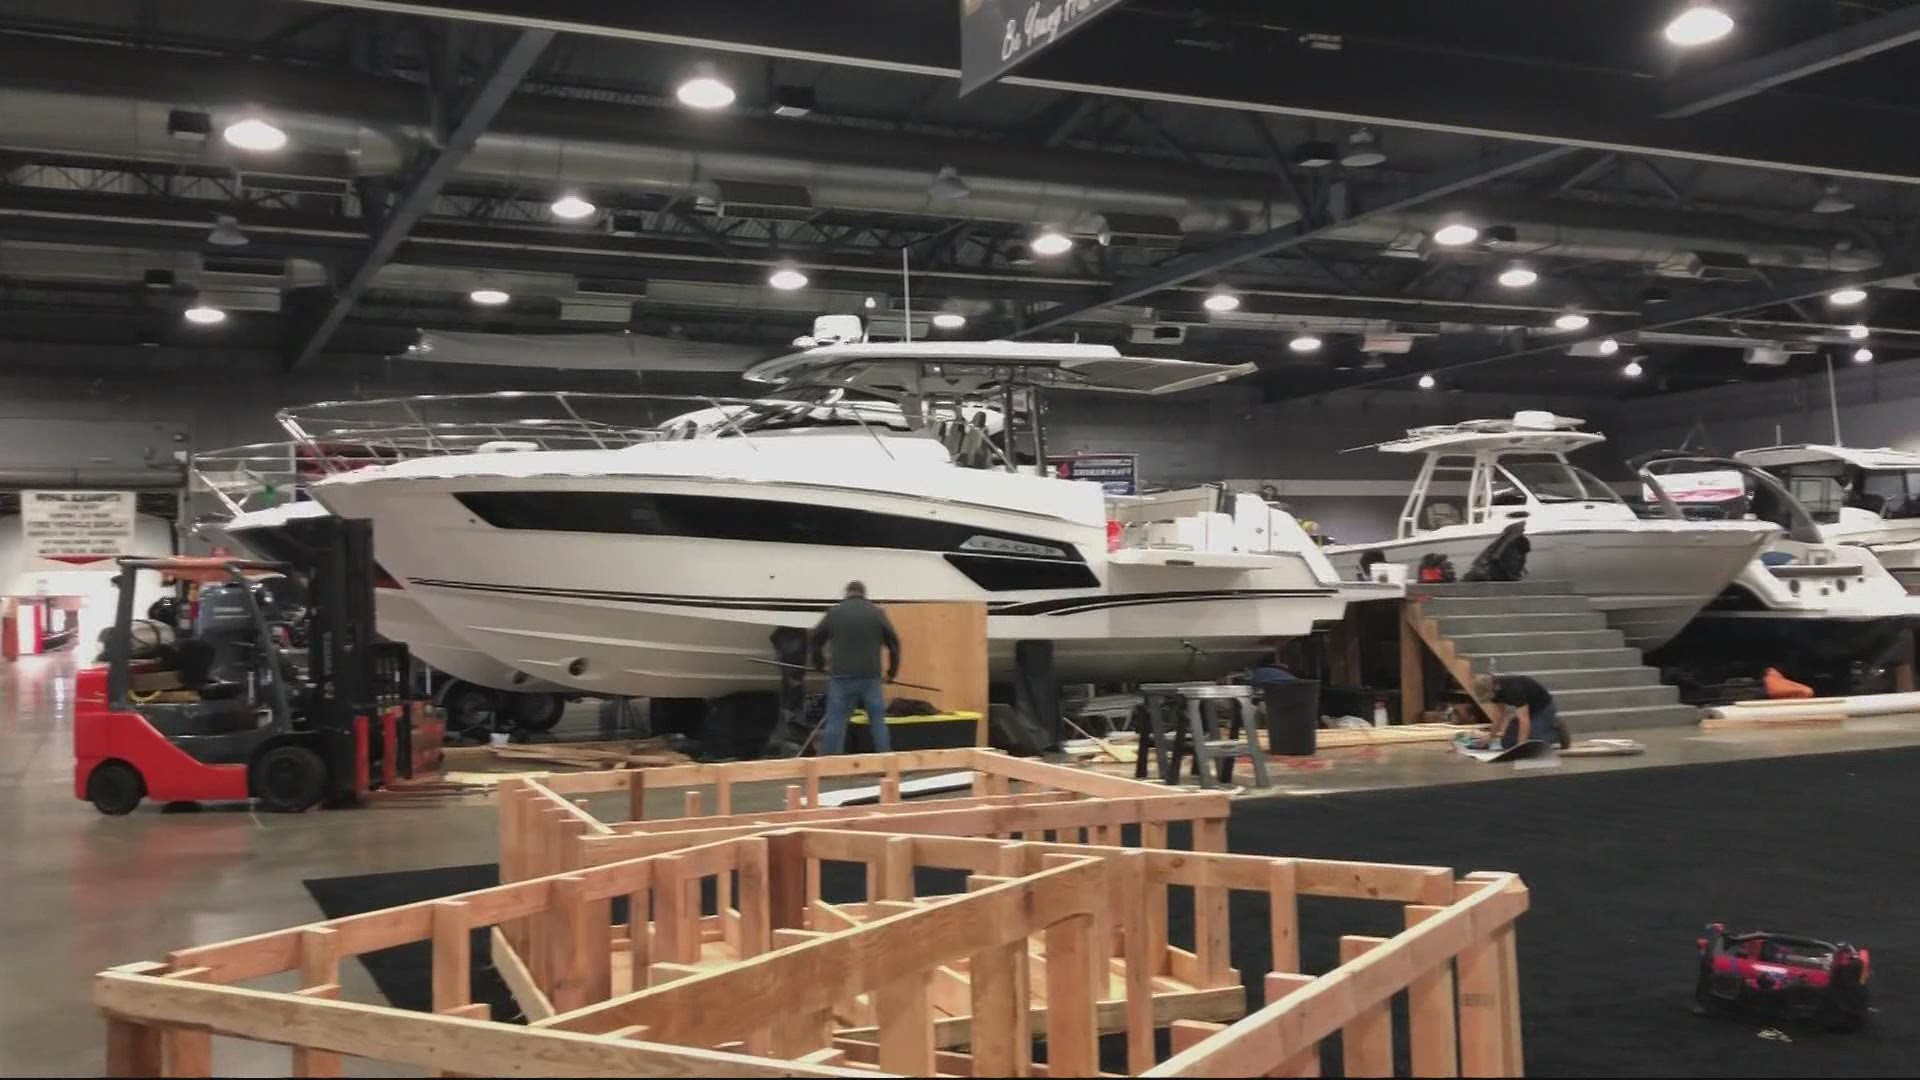 Portland Boat Show returns to Expo Center with limited capacity